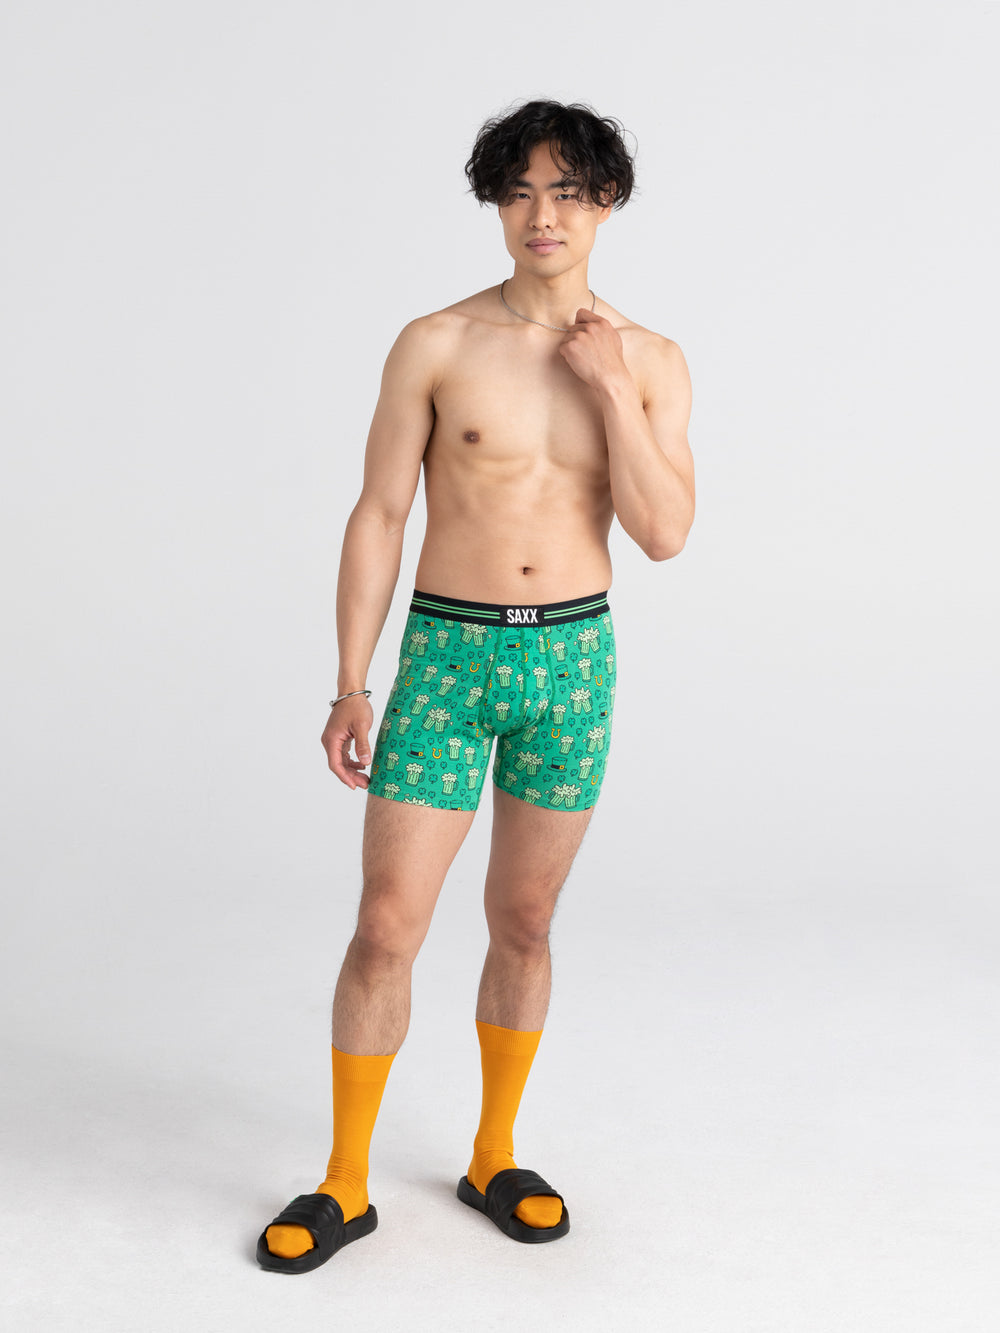 SAXX ULTRA BOXER BRIEF - ST. PATRICKS DAY - CLEARANCE